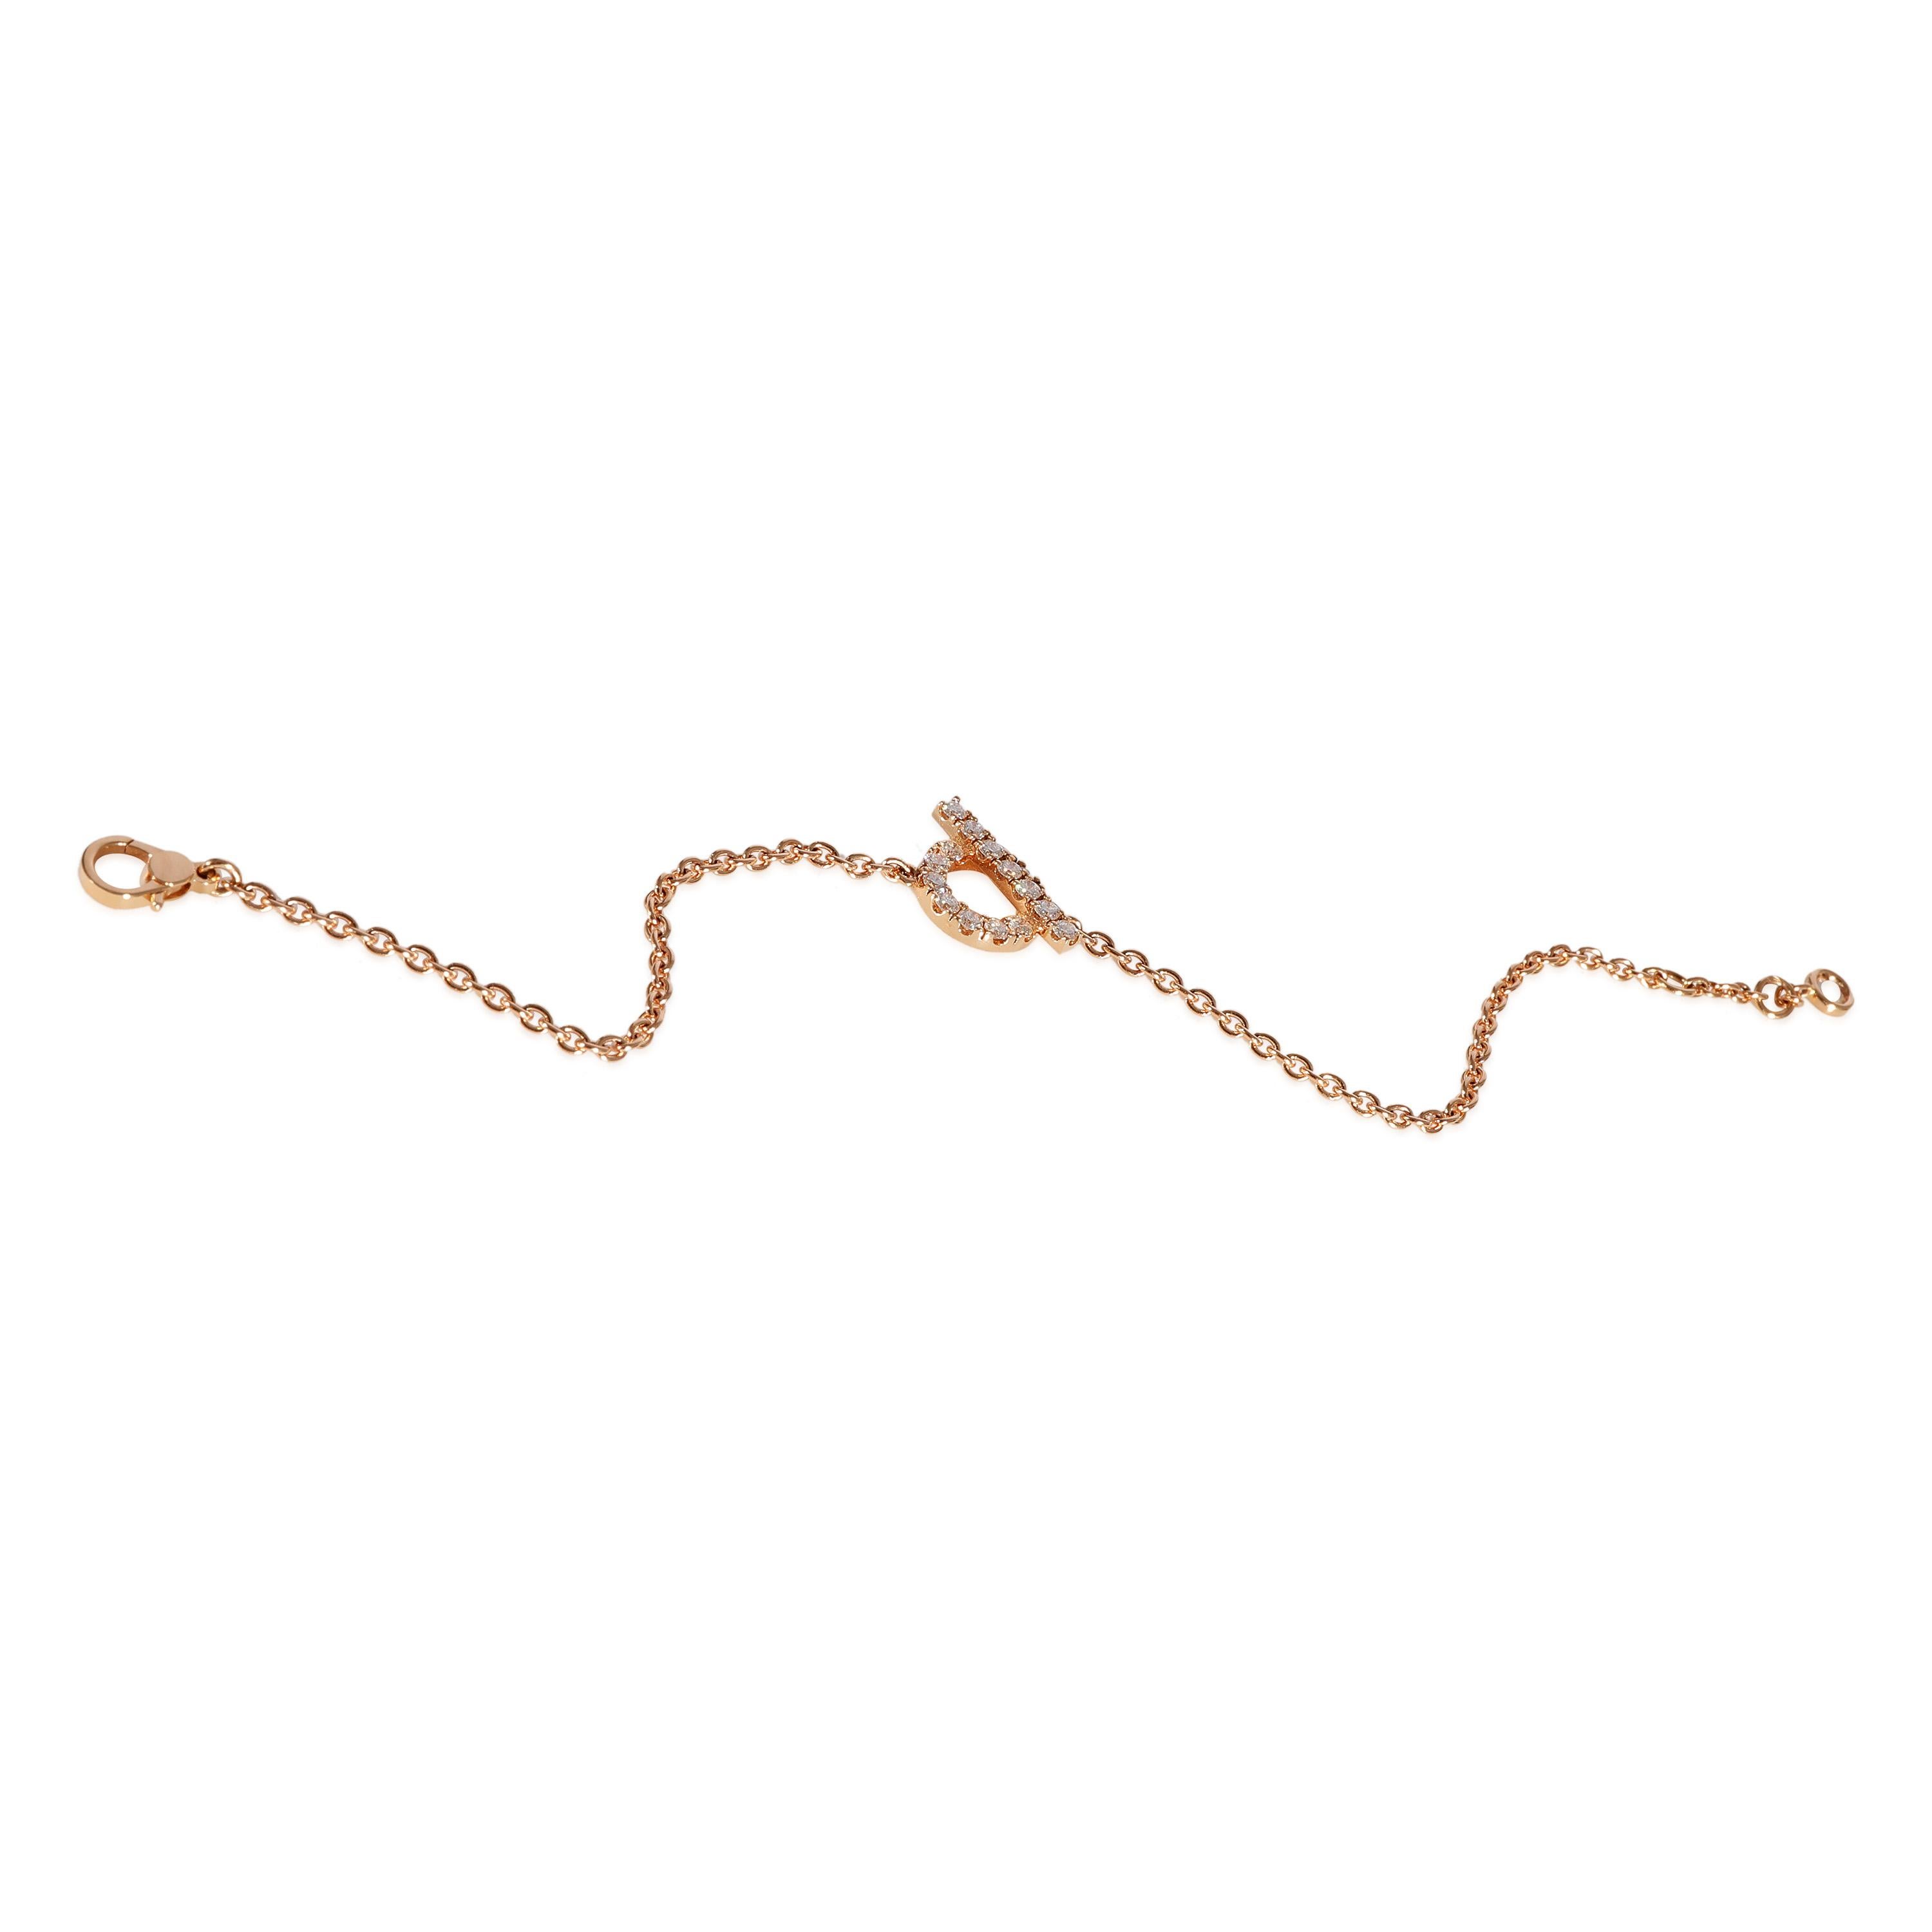 Hermès Finesse Diamond Bracelet in 18k Rose Gold 0.55 CTW

PRIMARY DETAILS
SKU: 123024
Listing Title: Hermès Finesse Diamond Bracelet in 18k Rose Gold 0.55 CTW
Condition Description: Retails for 5900 USD. In excellent condition. 6.5 inches in